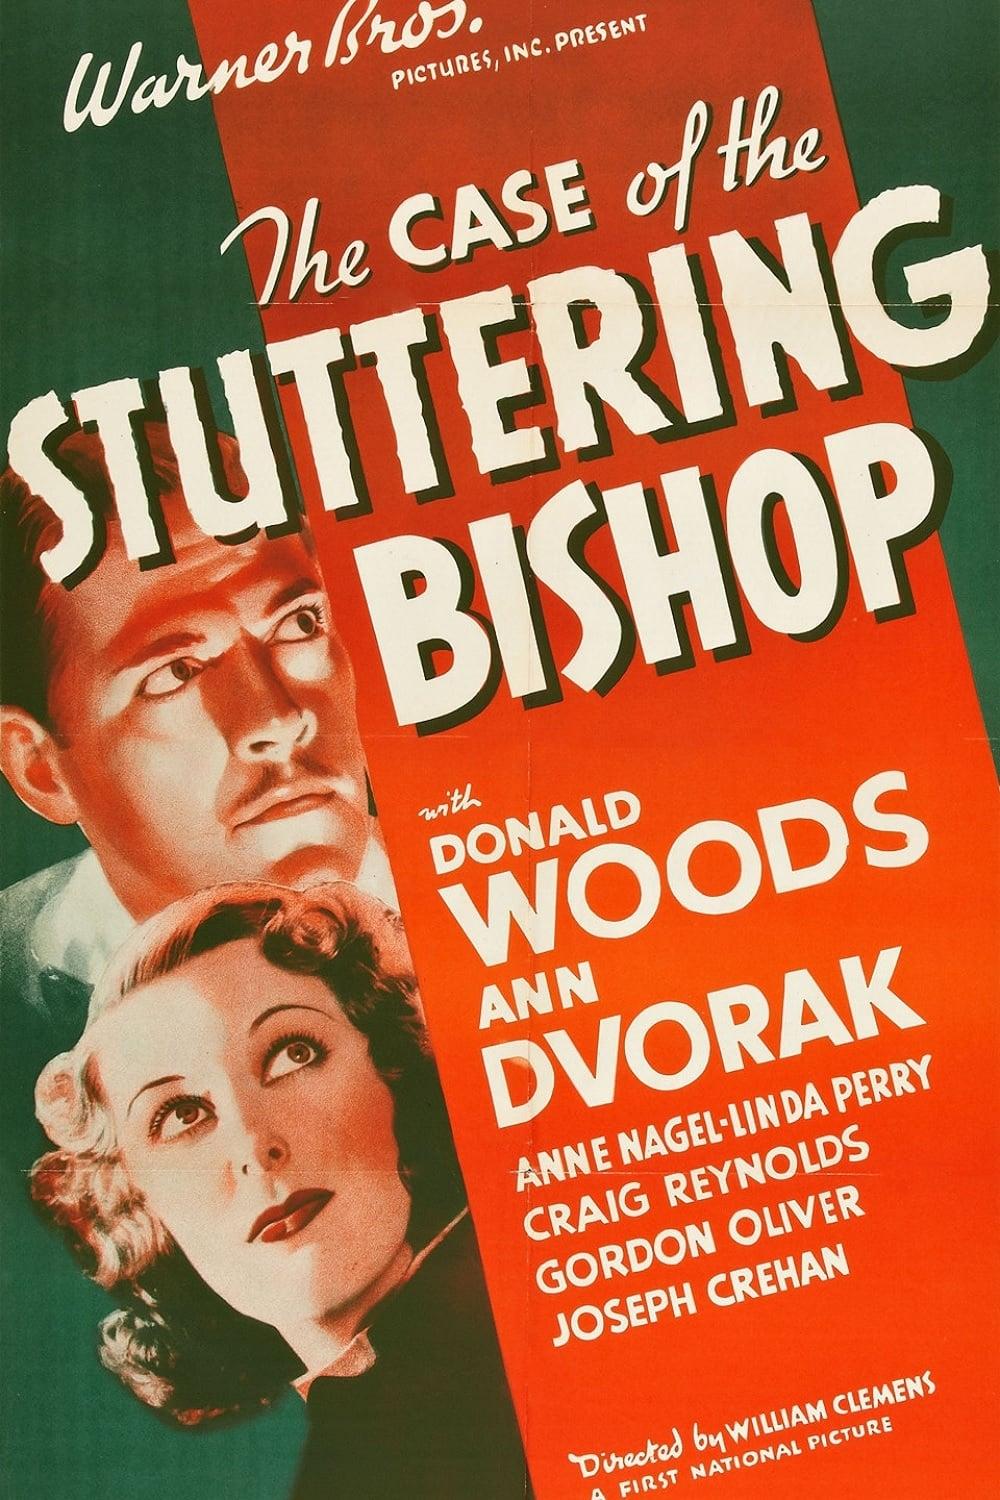 The Case of the Stuttering Bishop poster